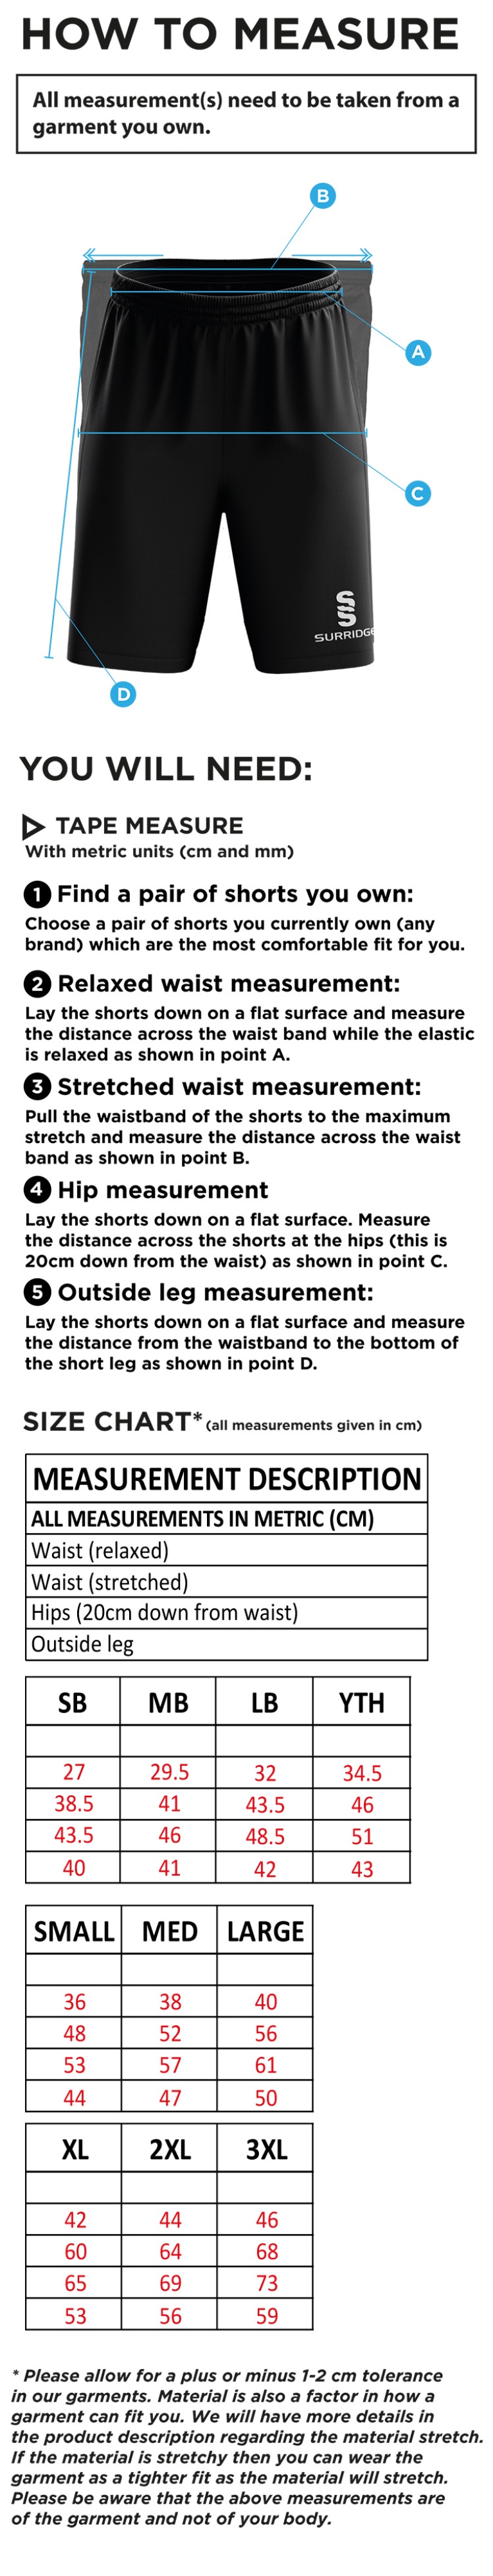 Durham College Society CC - Ripstop Short - Size Guide